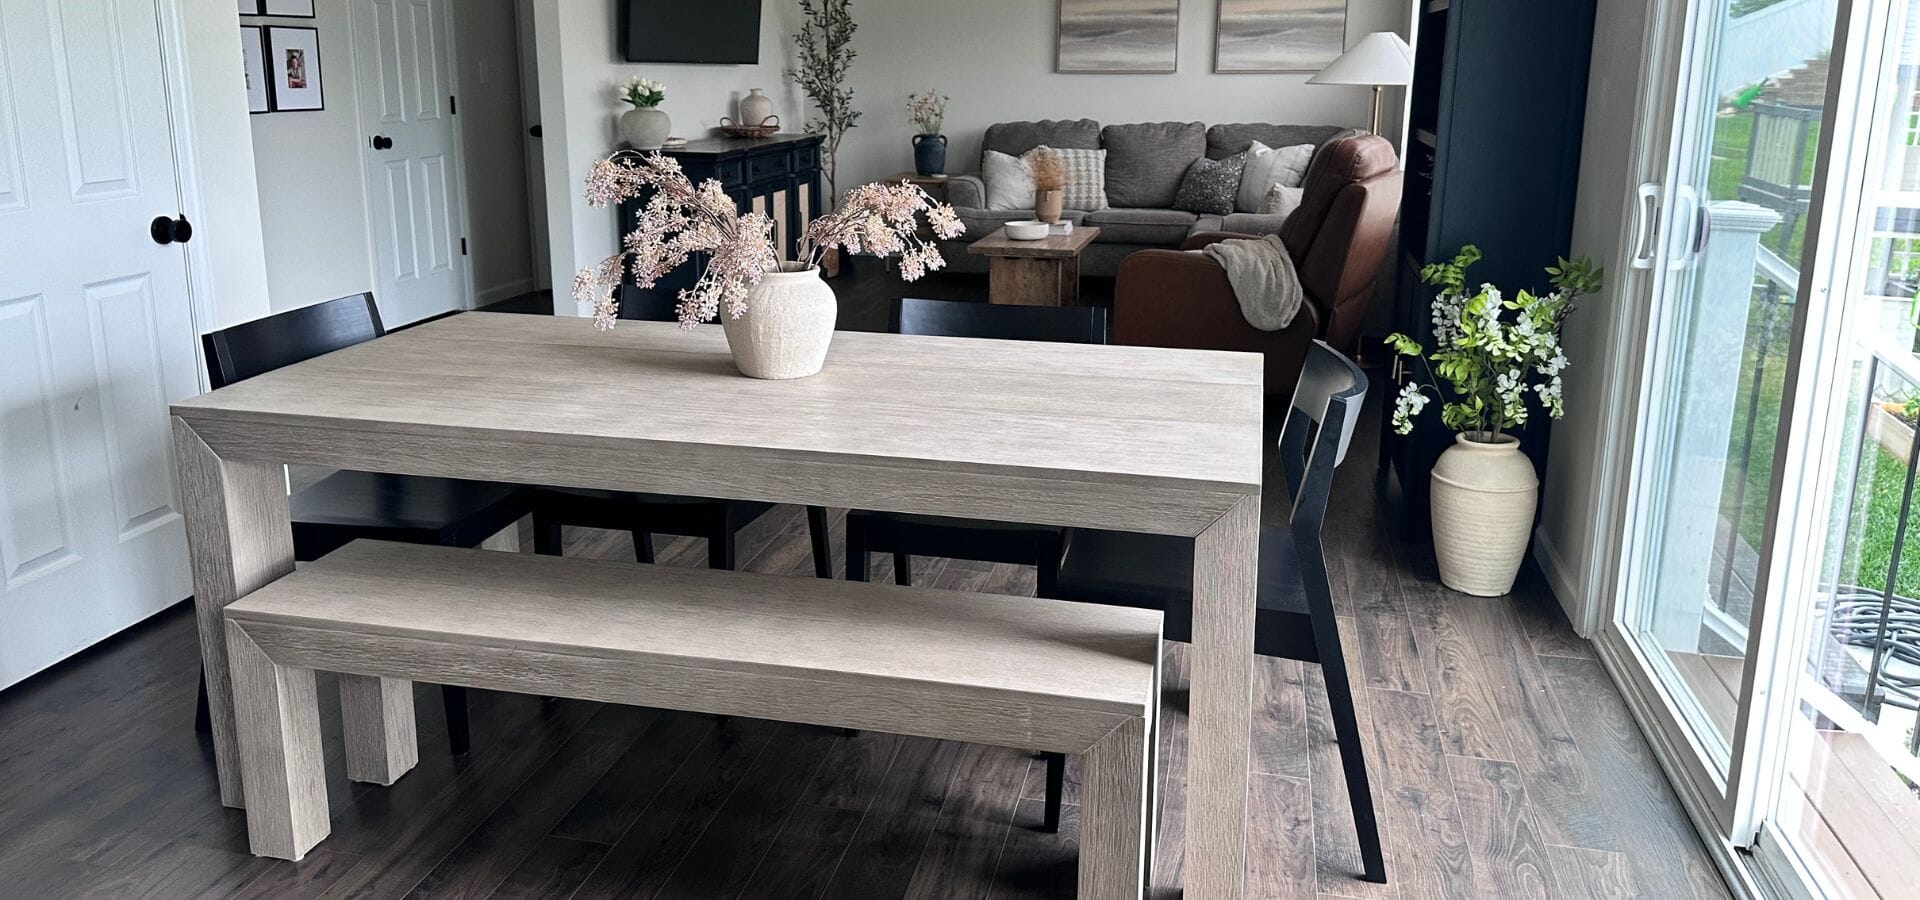 Light Wood Furniture: Everything You Need to Know